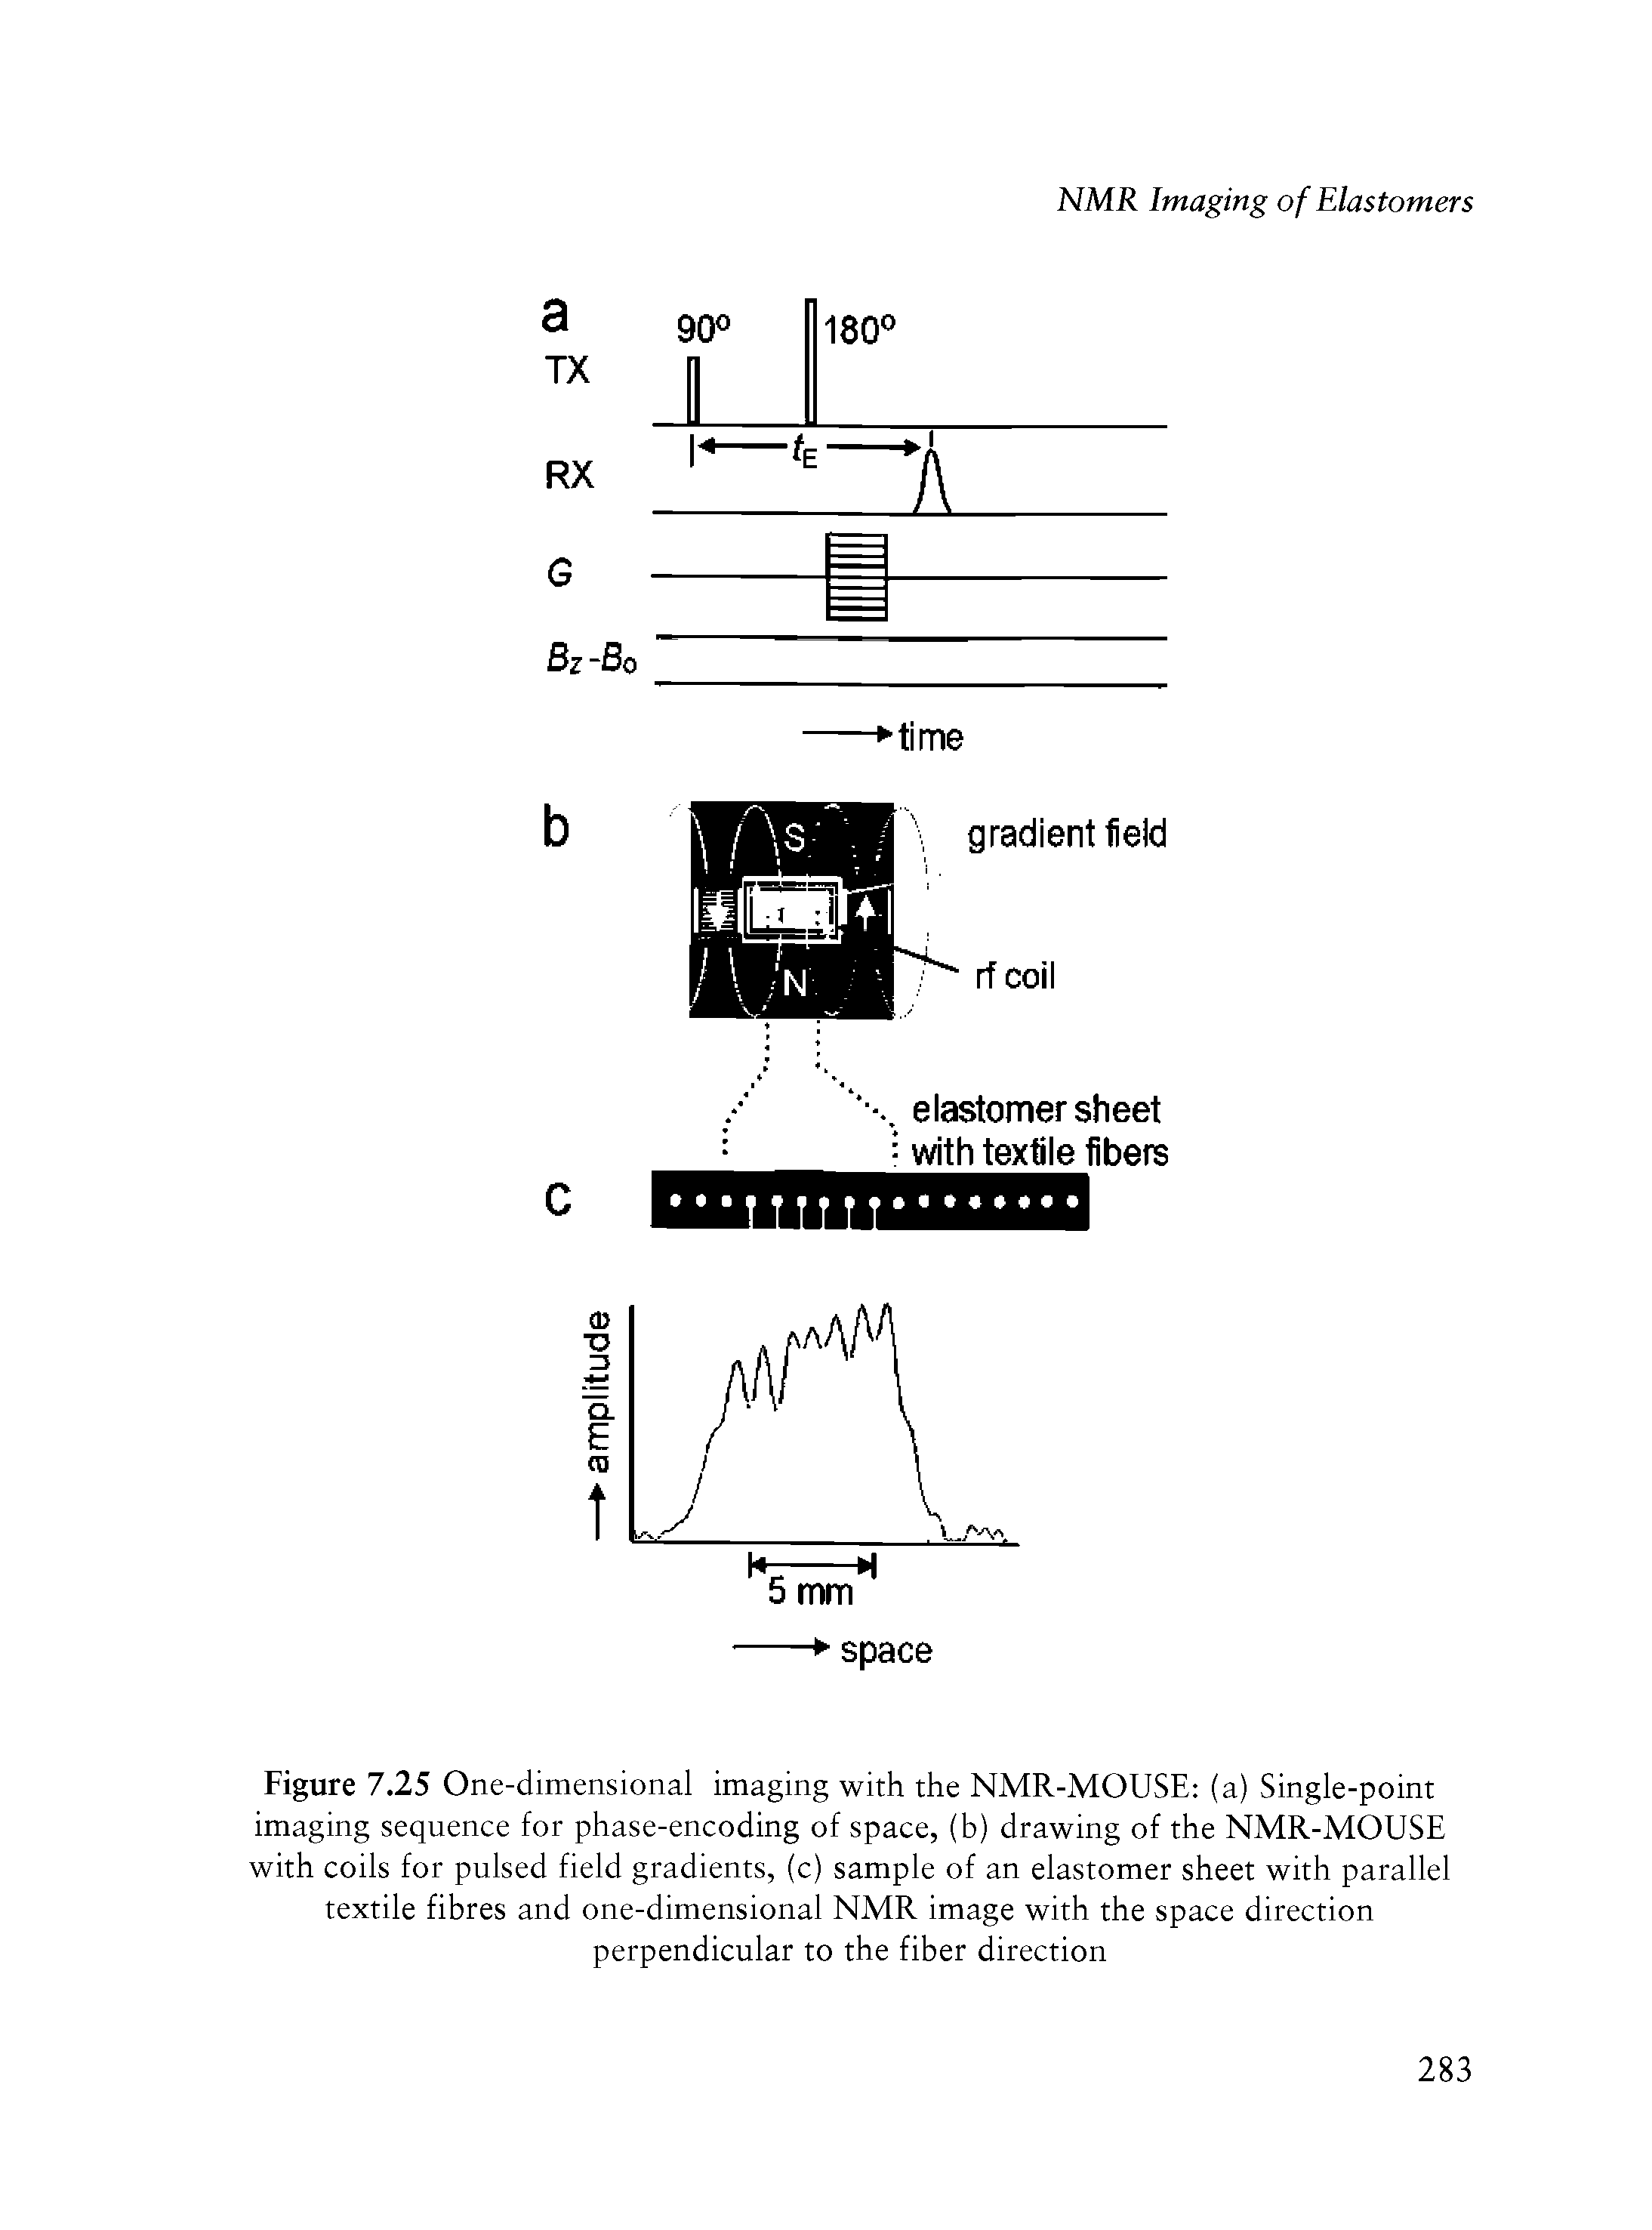 Figure 7.25 One-dimensional imaging with the NMR-MOUSE (a) Single-point imaging sequence for phase-encoding of space, (b) drawing of the NMR-MOUSE with coils for pulsed field gradients, (c) sample of an elastomer sheet with parallel textile fibres and one-dimensional NMR image with the space direction perpendicular to the fiber direction...